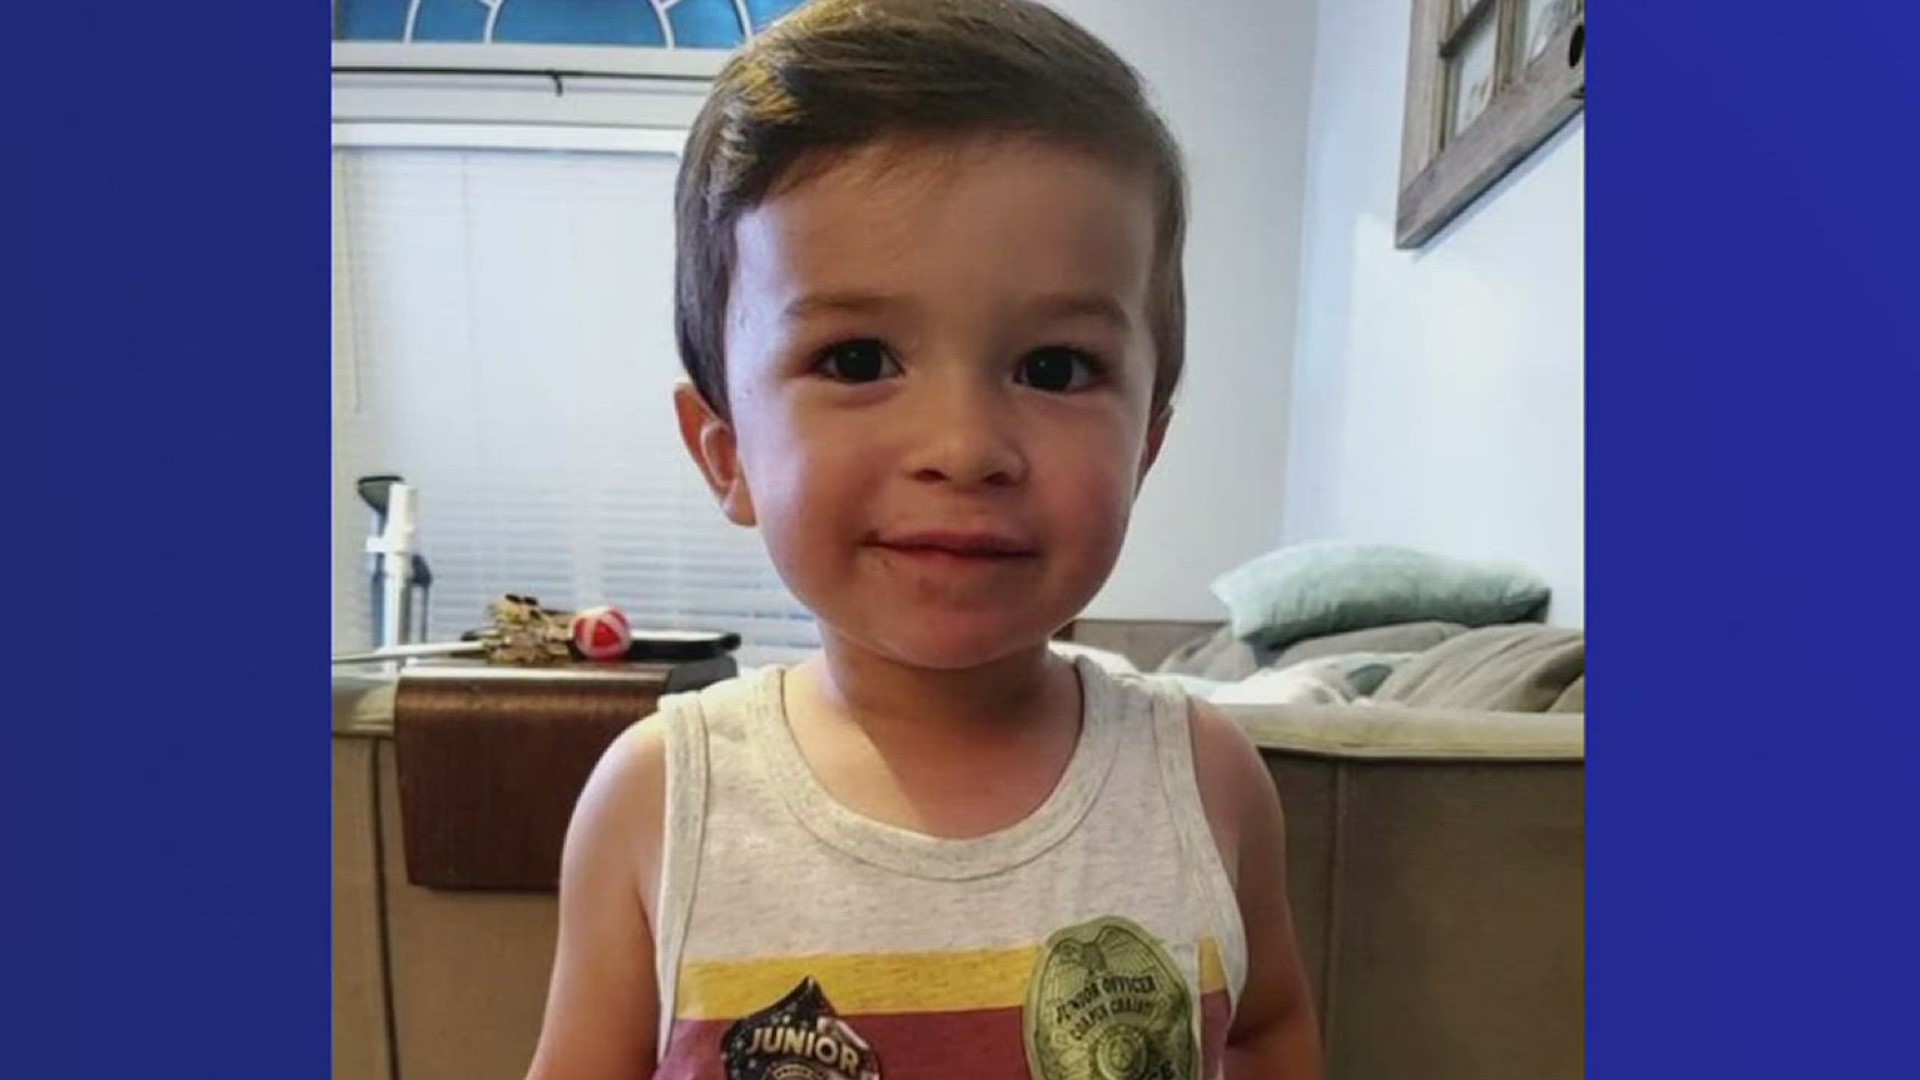 3-year-old Maverick and his grandfather were able to help their neighbor Silvia, who was pinned between two cars.